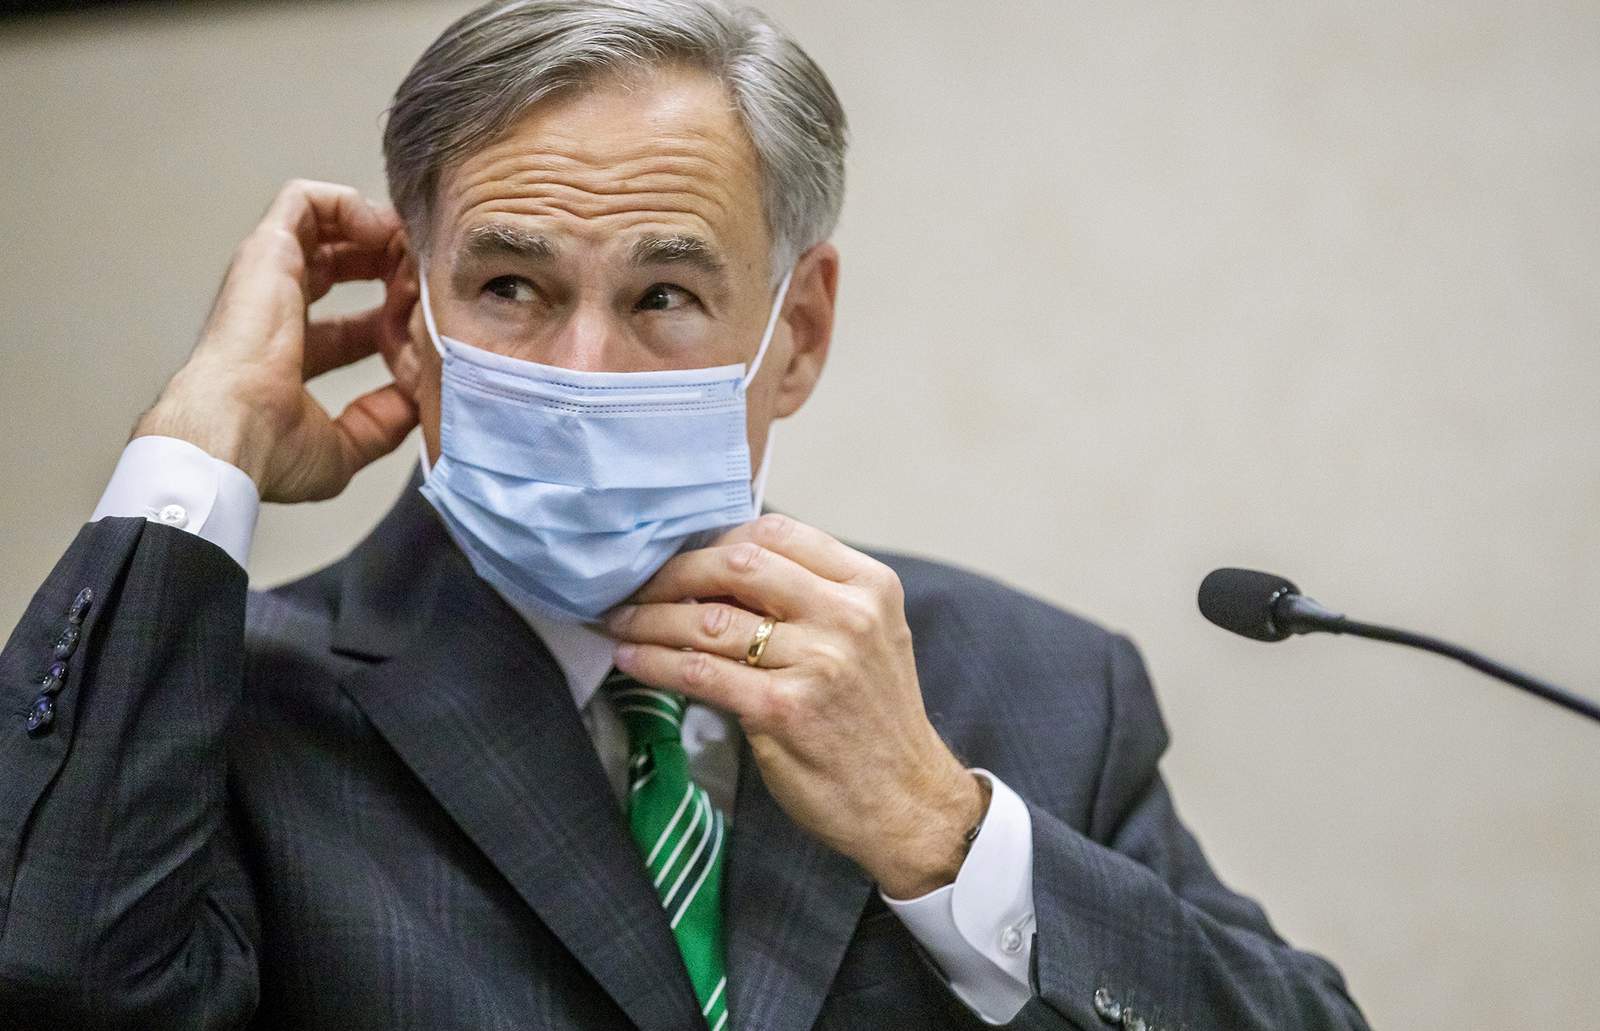 Governor Abbott Establishes Statewide Face Covering Requirement, Issues Proclamation To Limit Gatherings